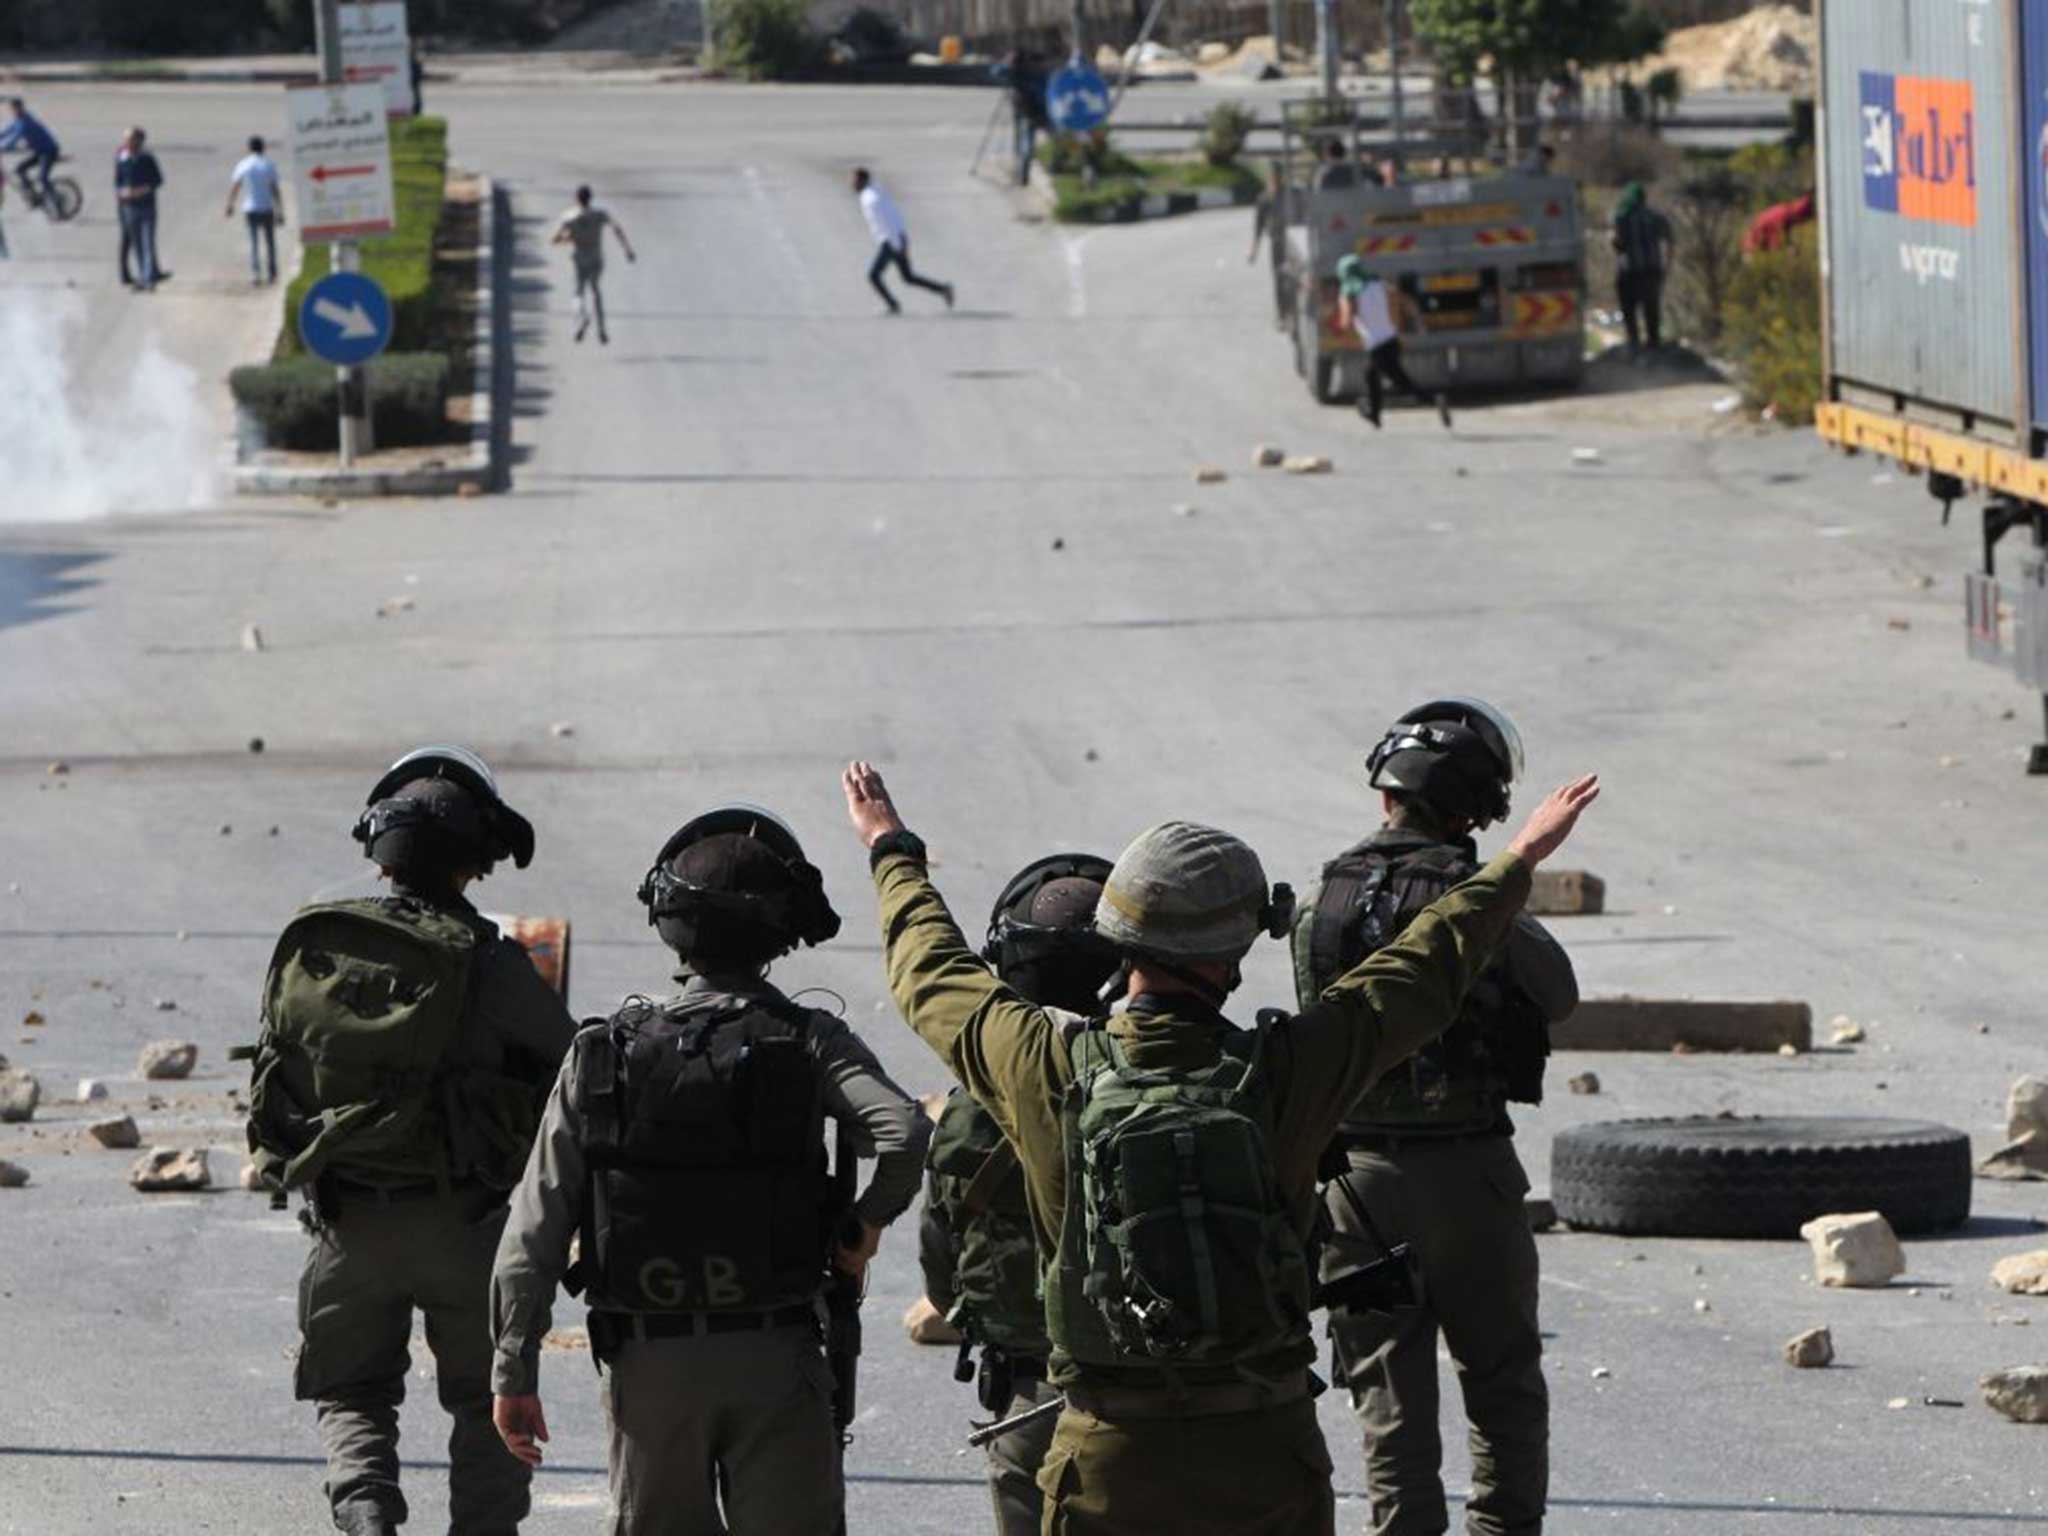 IDF soldiers clear a street during a Palestinian demonstration last week